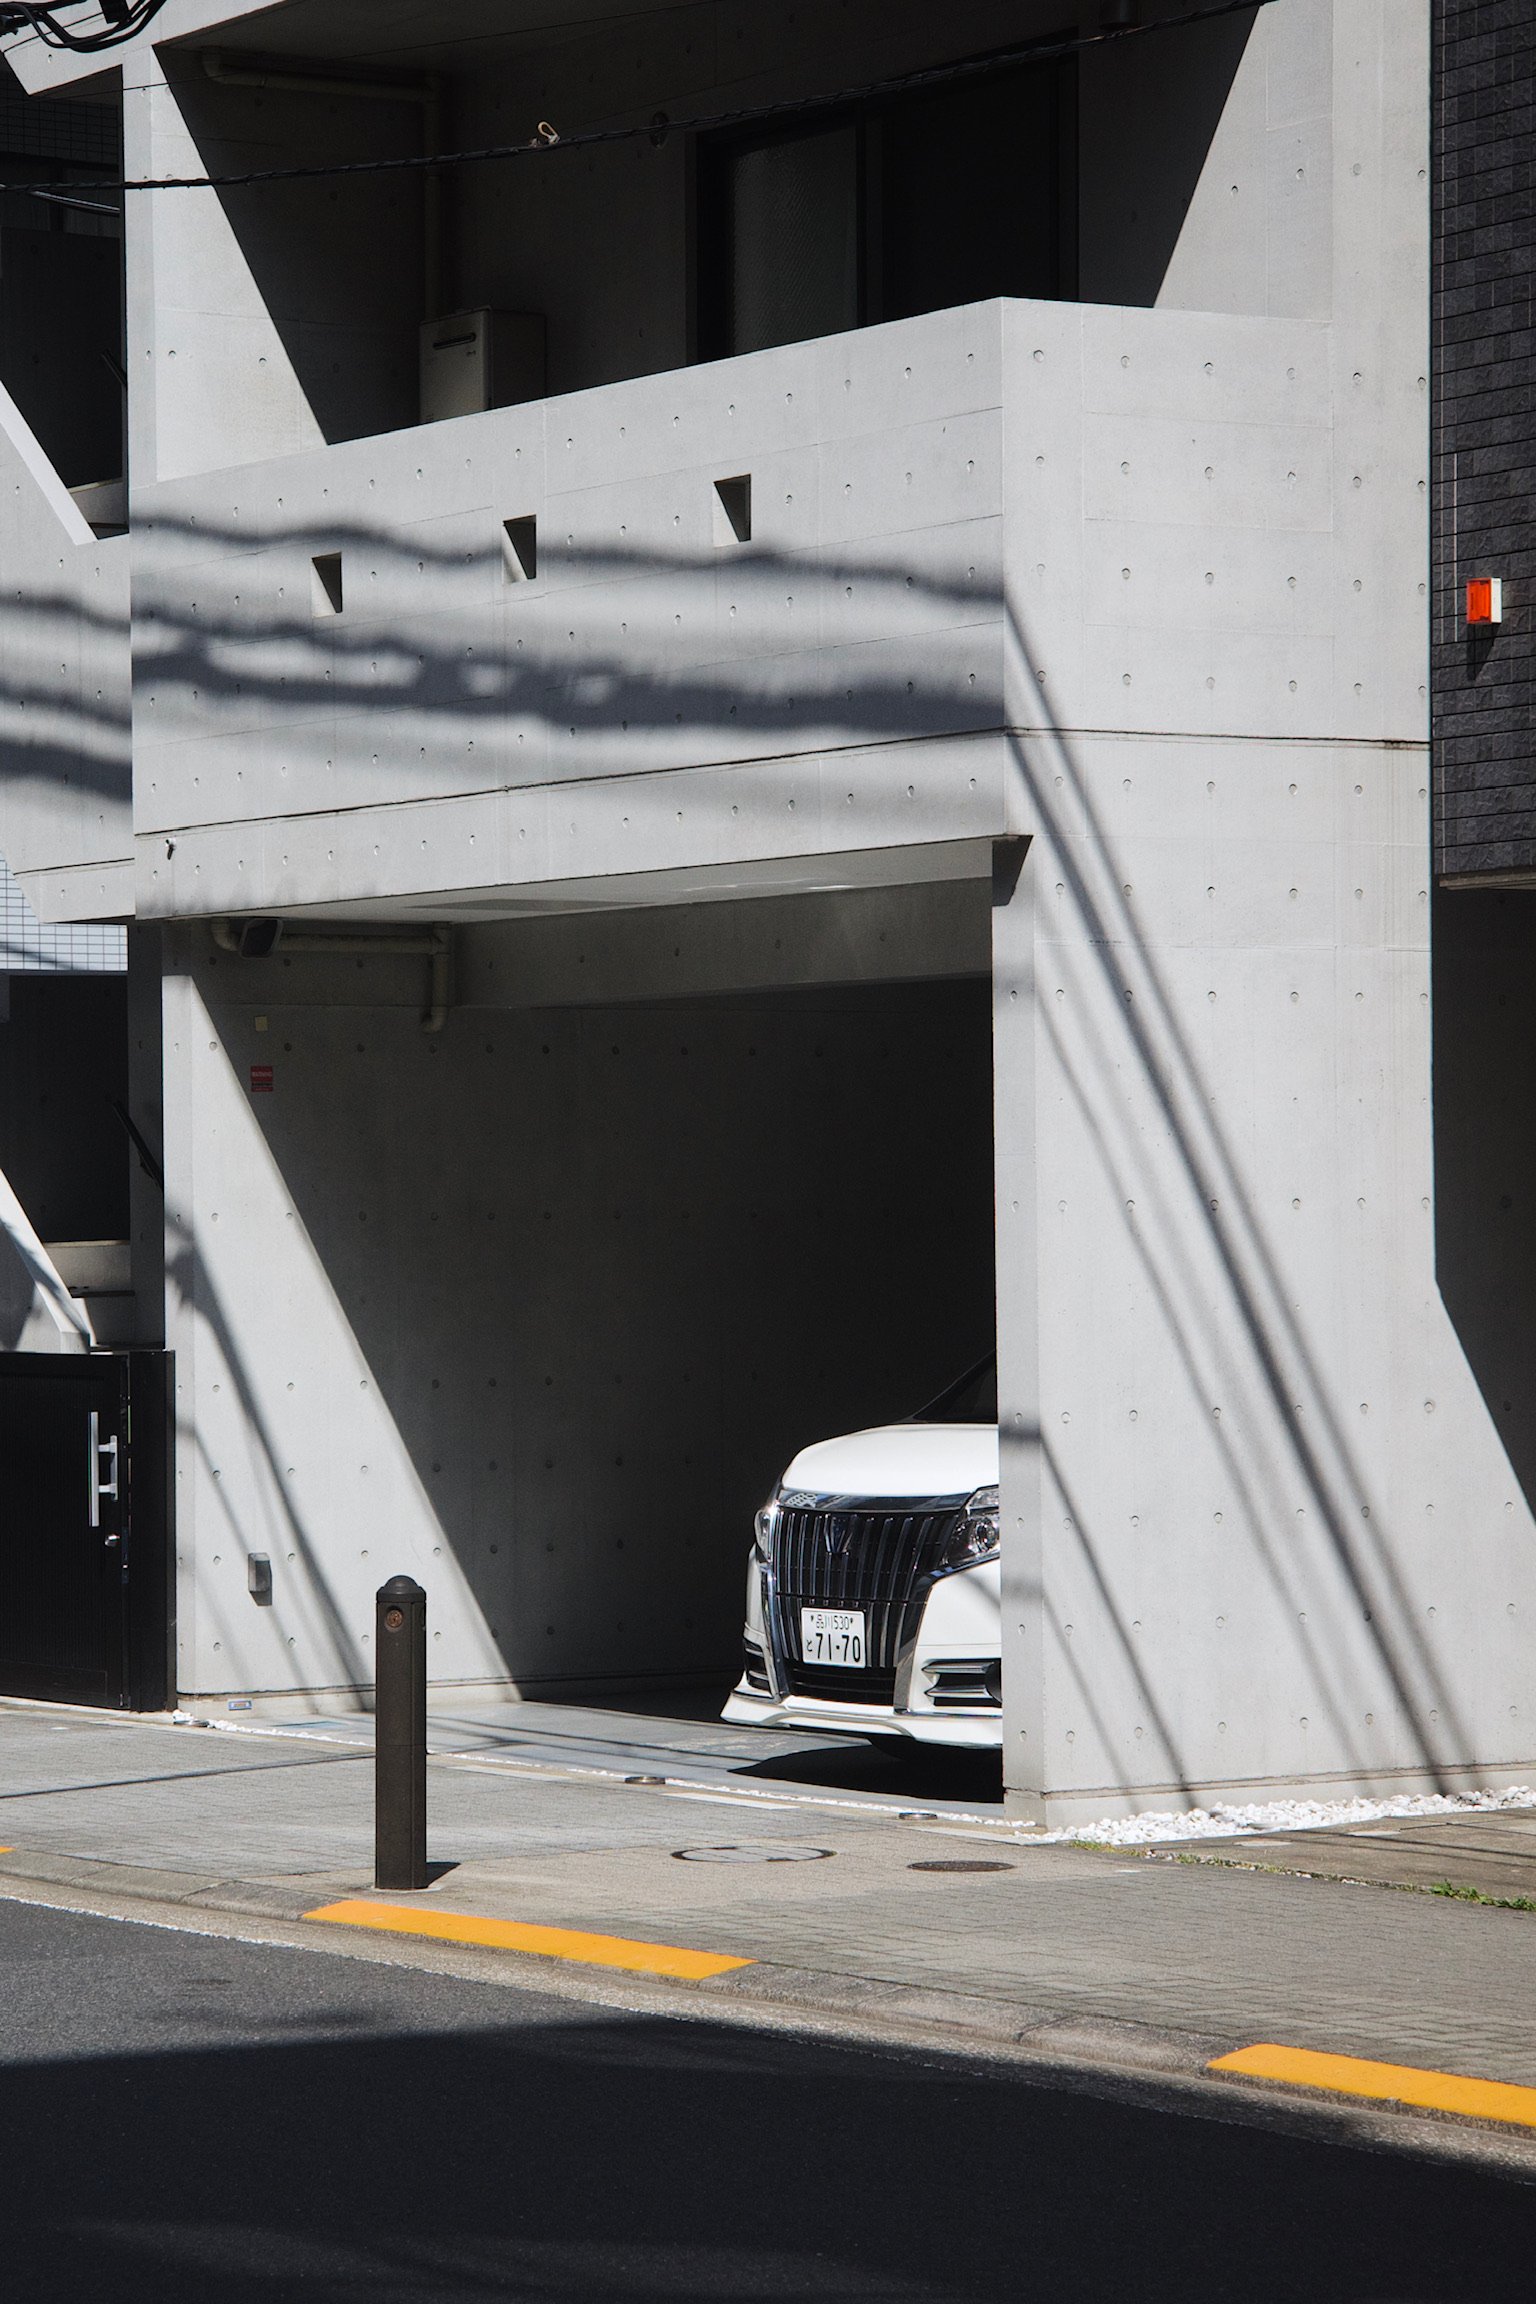 a car parked in a garage on the street level, white building with shadow of street lamps casted on the walls.